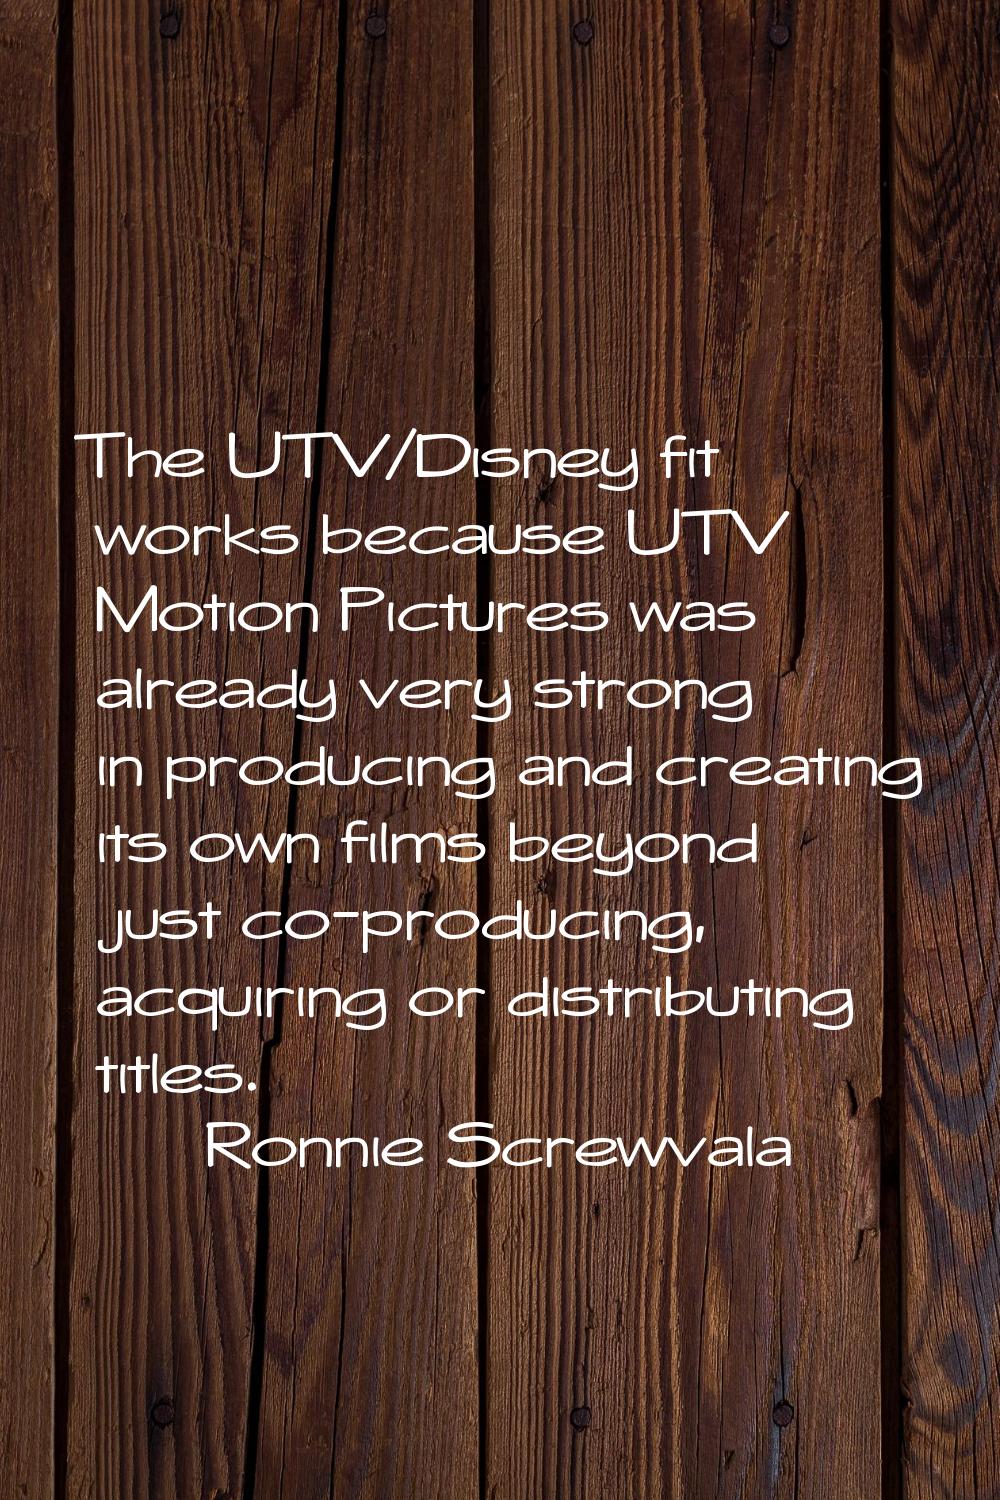 The UTV/Disney fit works because UTV Motion Pictures was already very strong in producing and creat